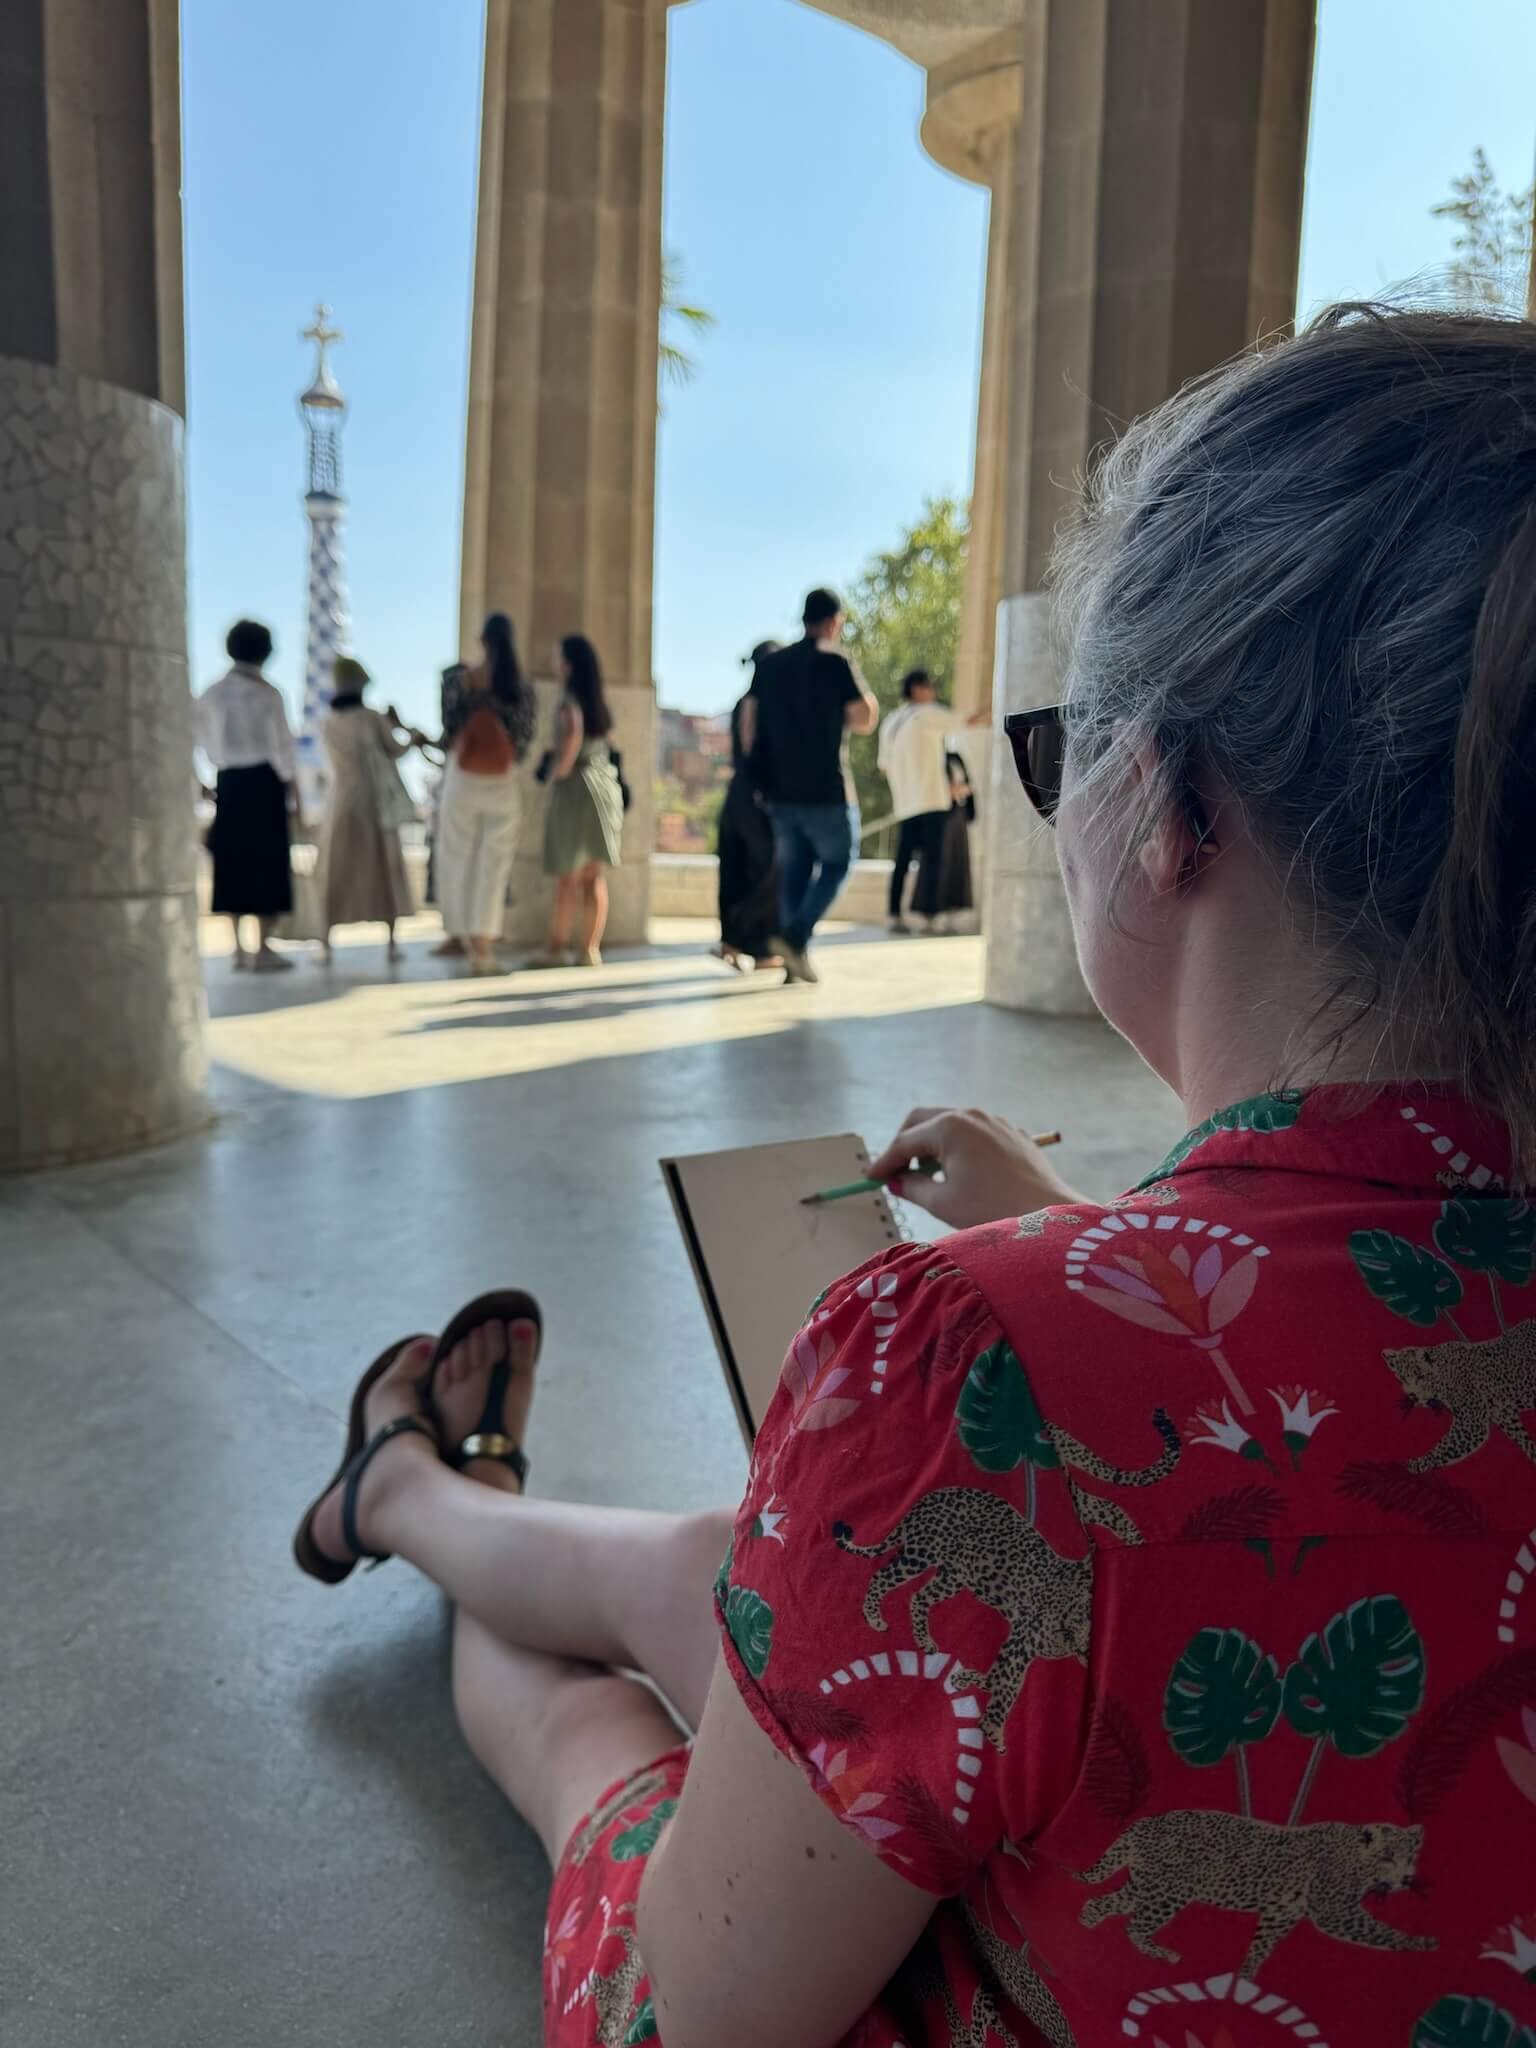 Sketching the tower in Park Güell